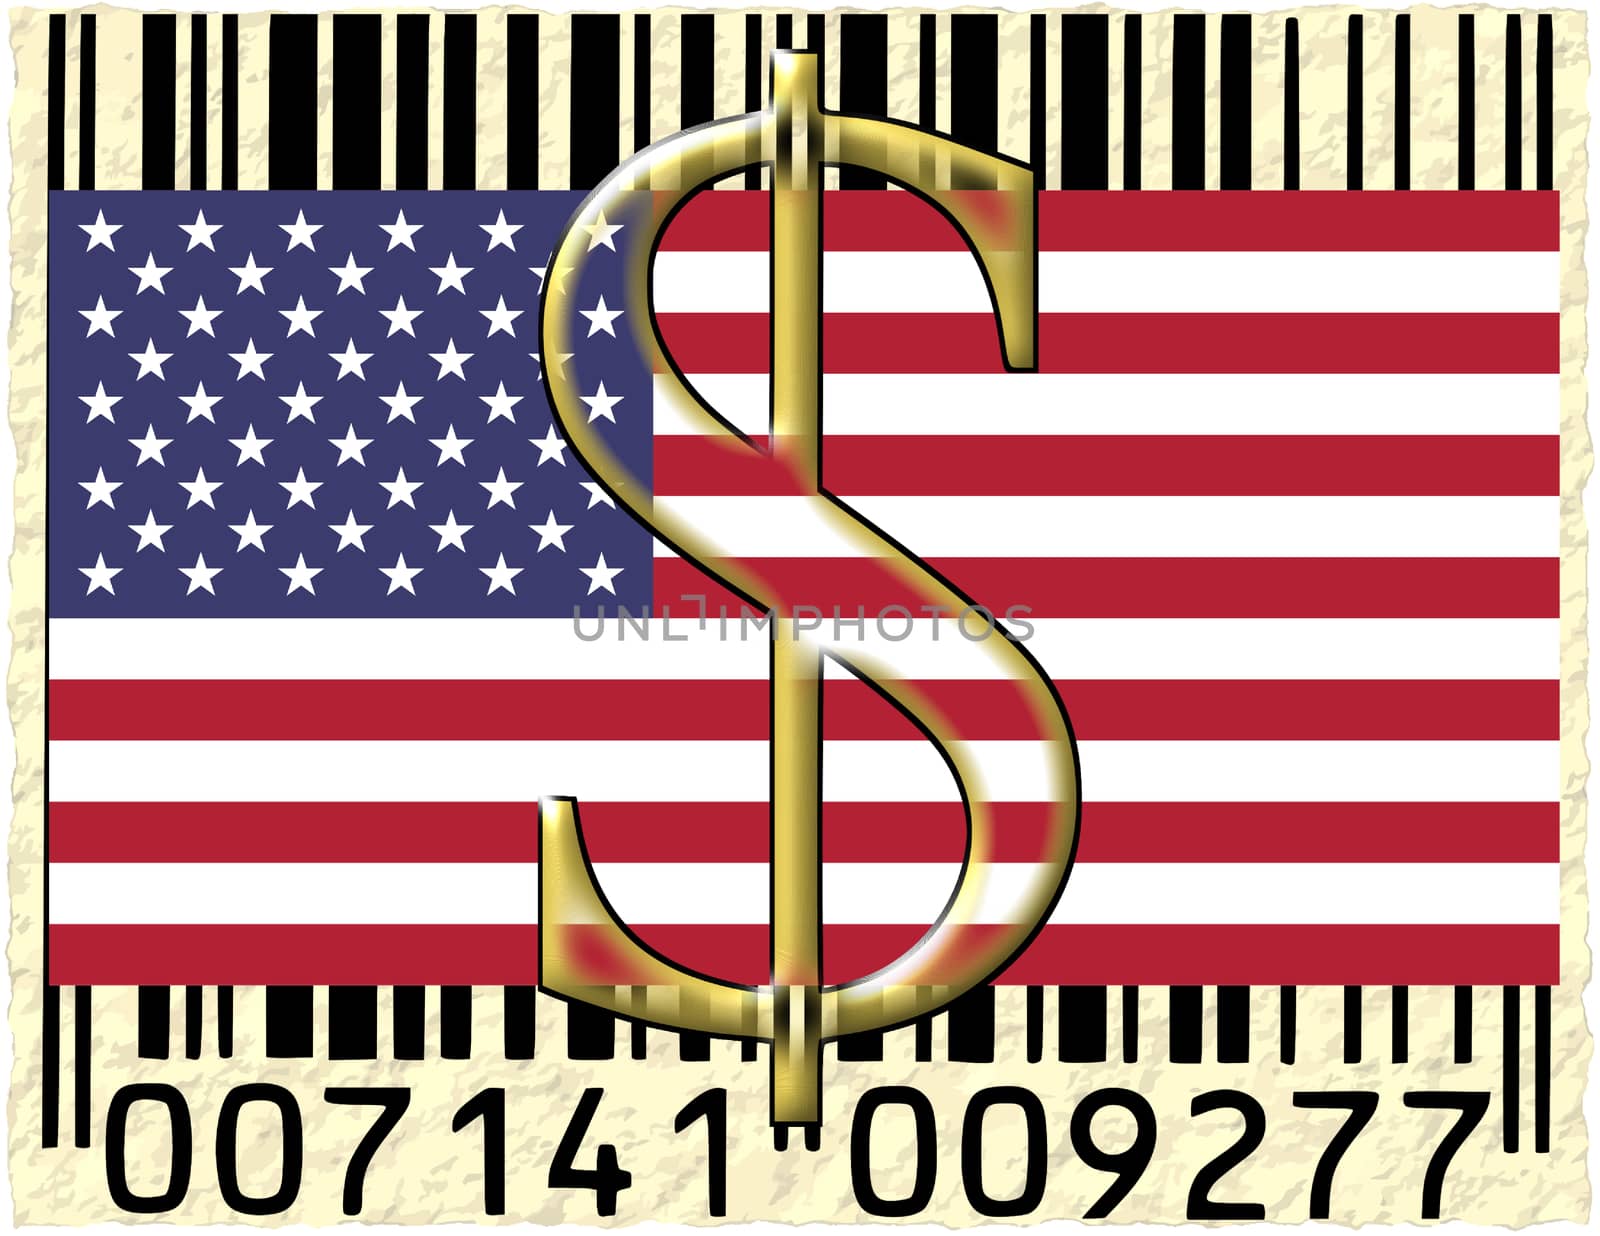 United States currency